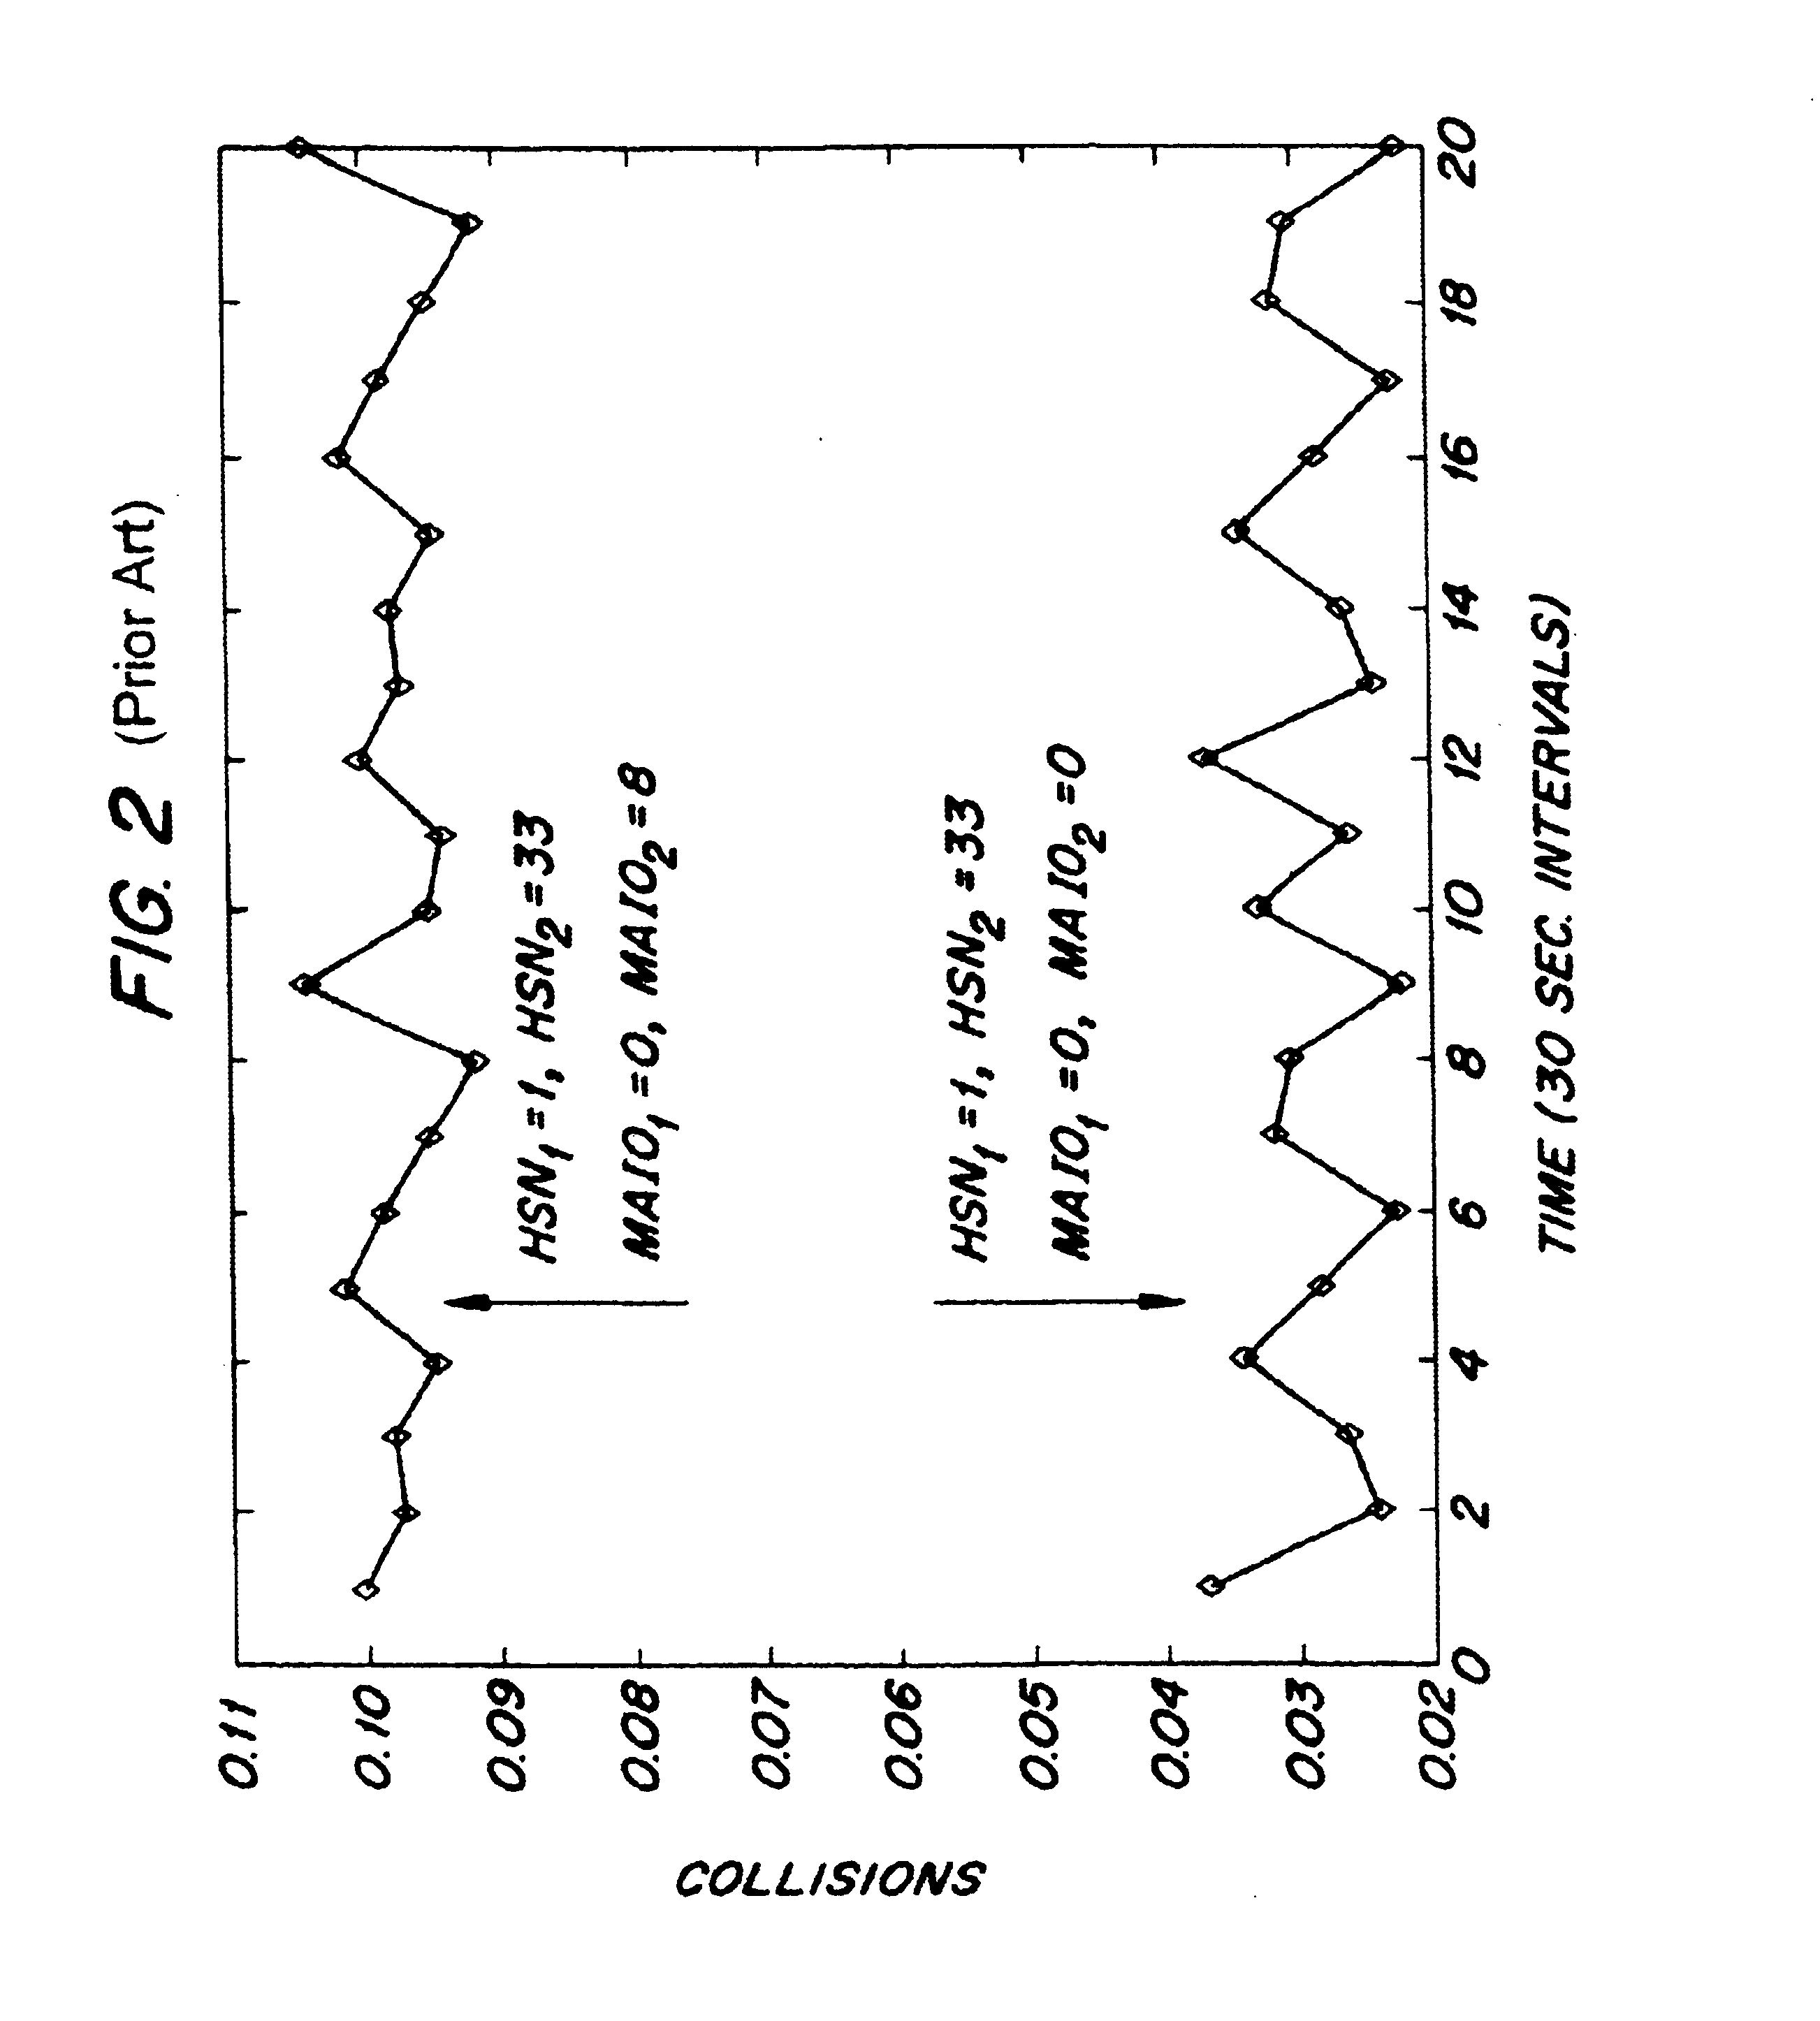 Frequency hopping sequence allocation